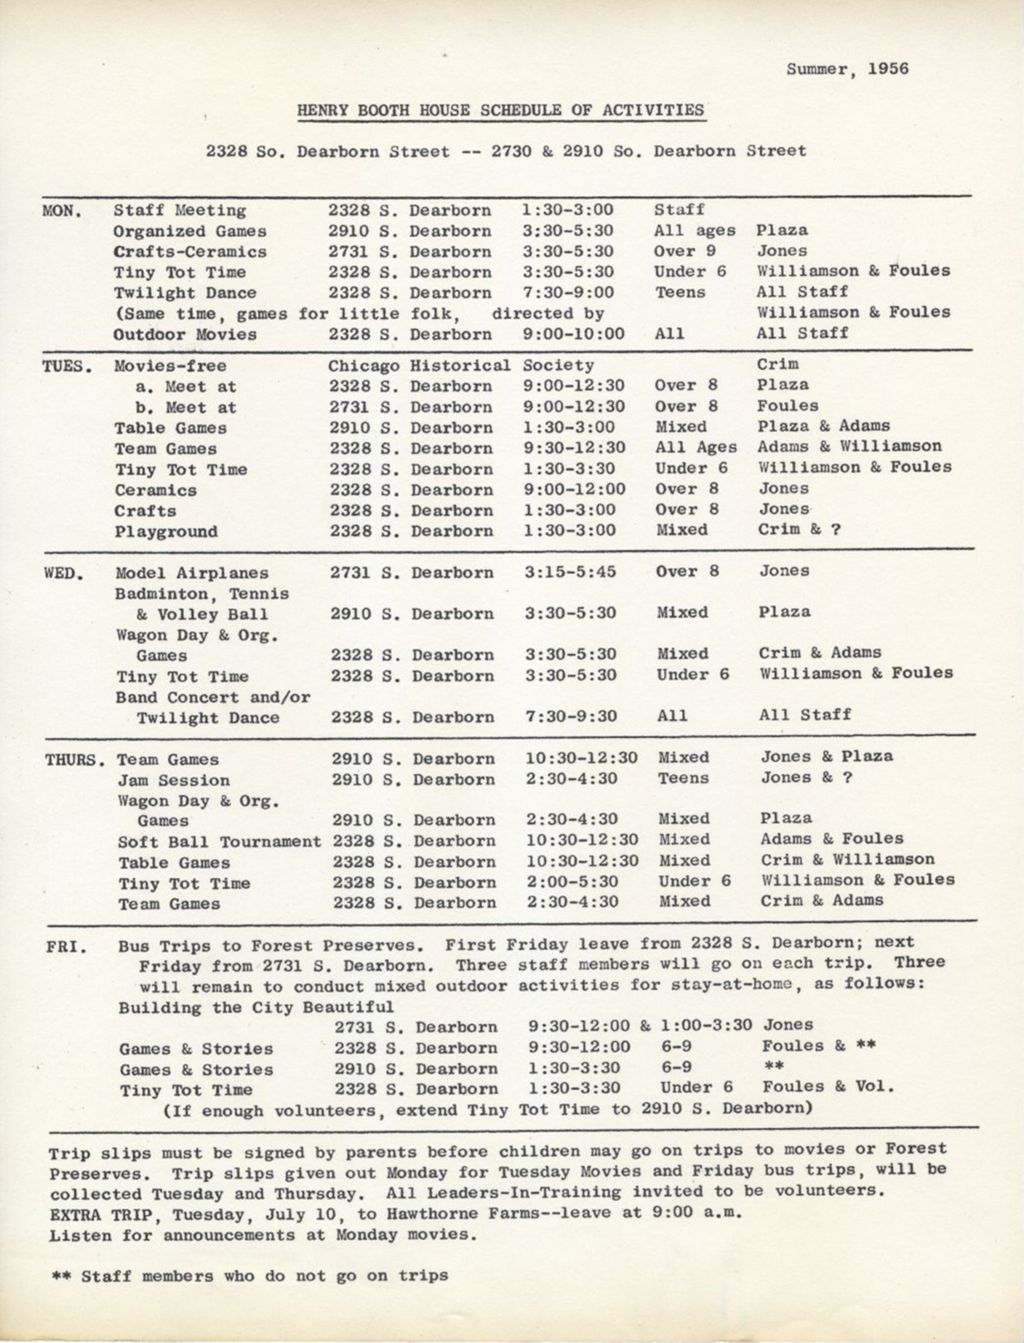 Miniature of Henry Booth House schedule of activities